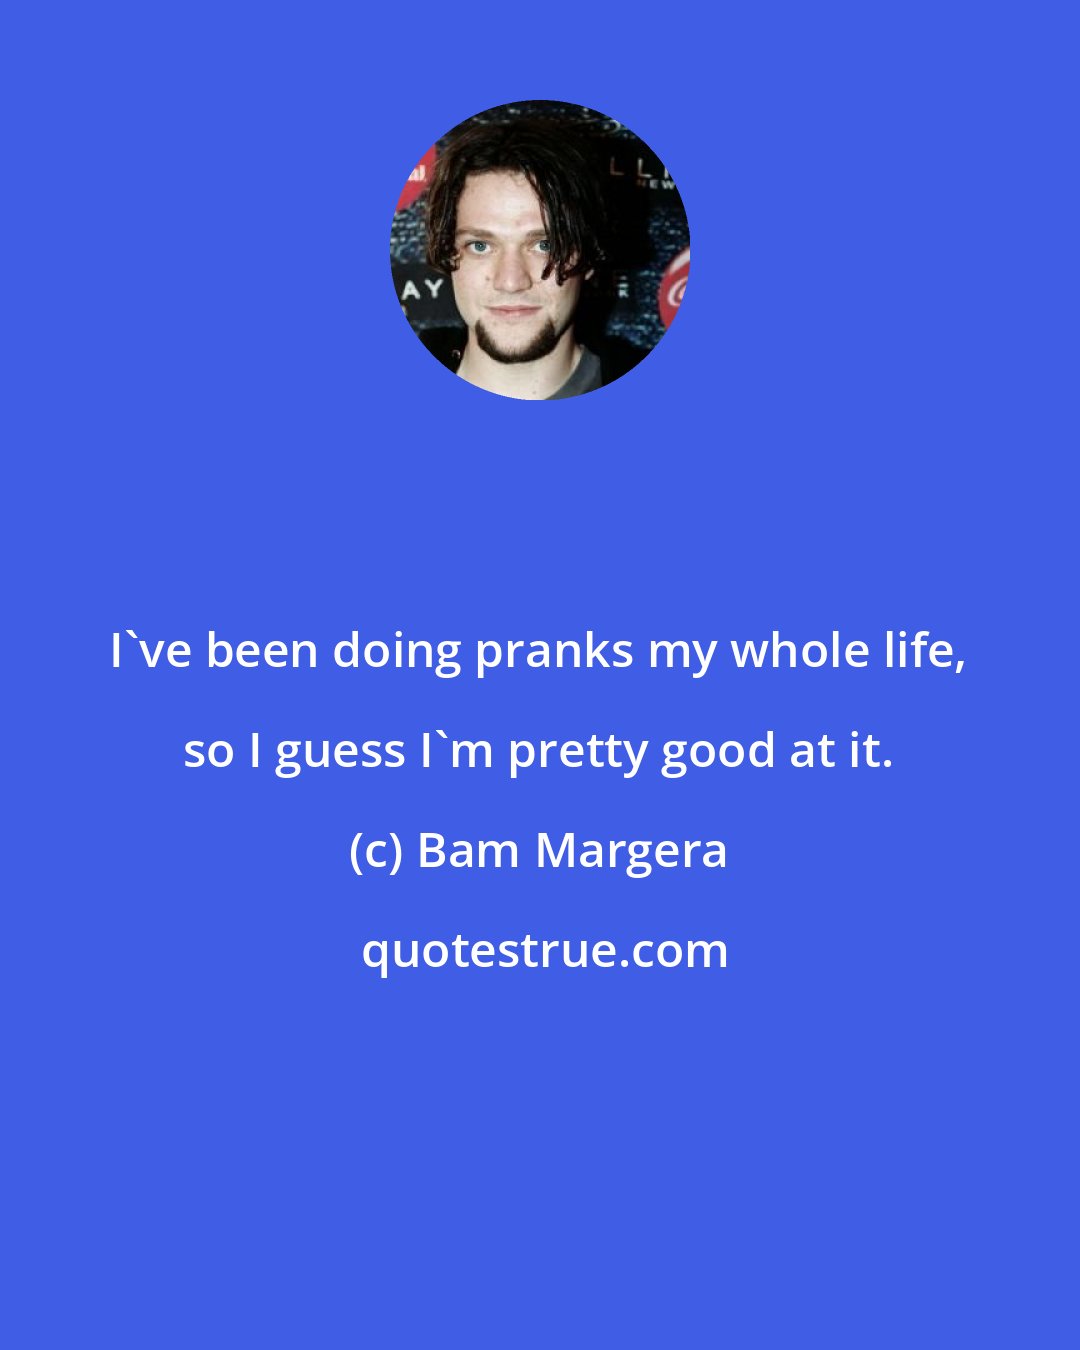 Bam Margera: I've been doing pranks my whole life, so I guess I'm pretty good at it.